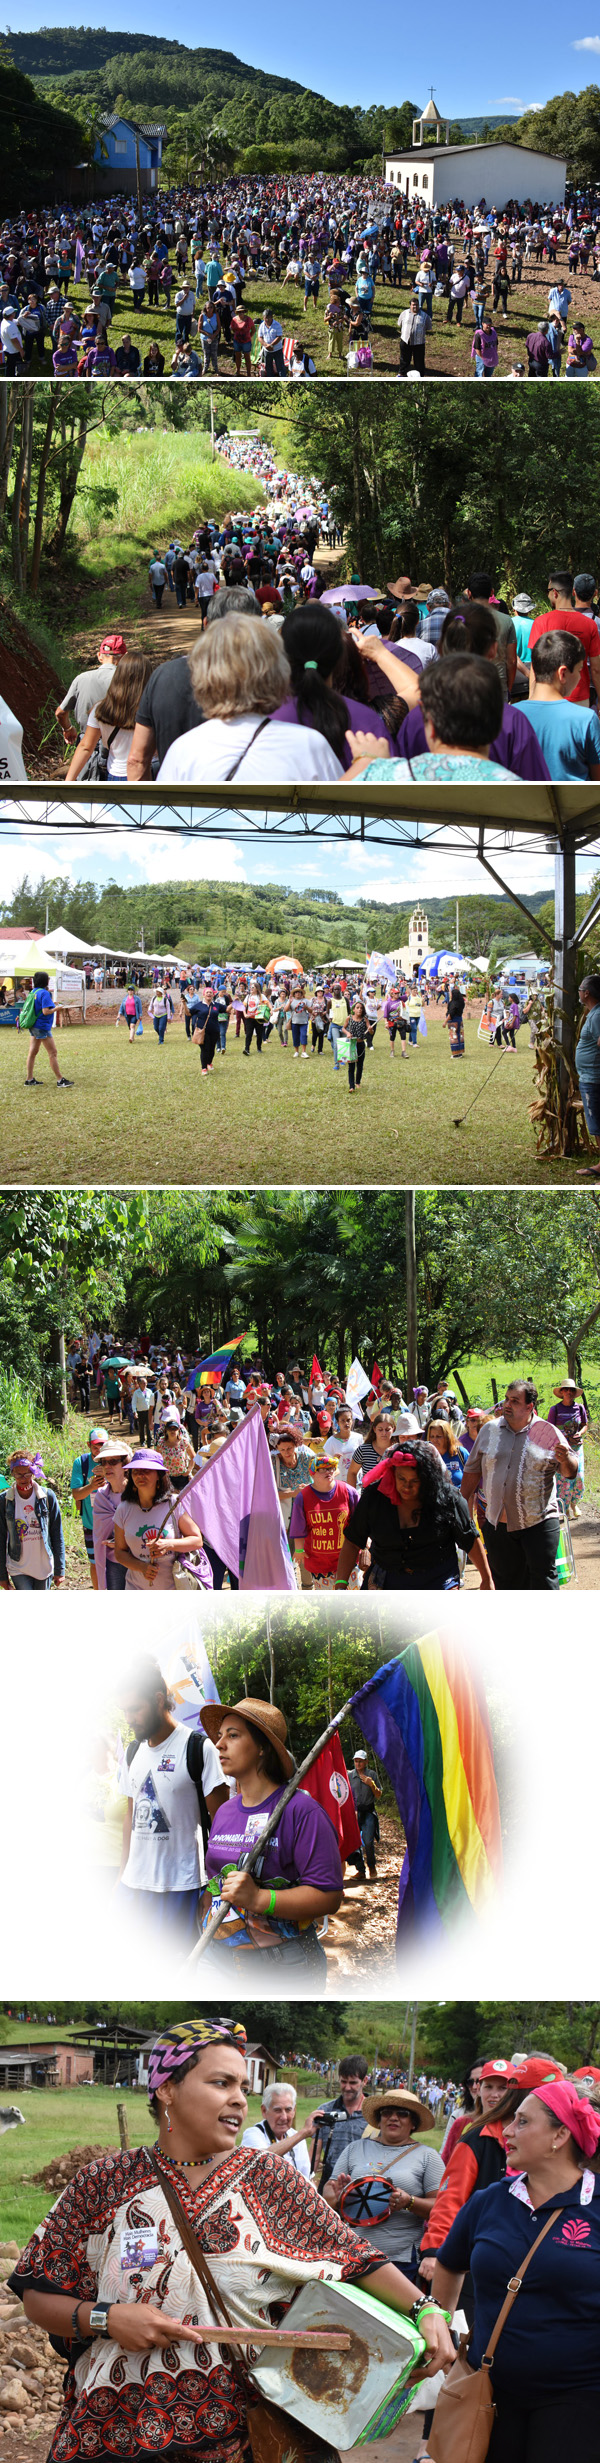 Photo montage of crowds attending the concelebration at the Romaria da Terra, Brazil